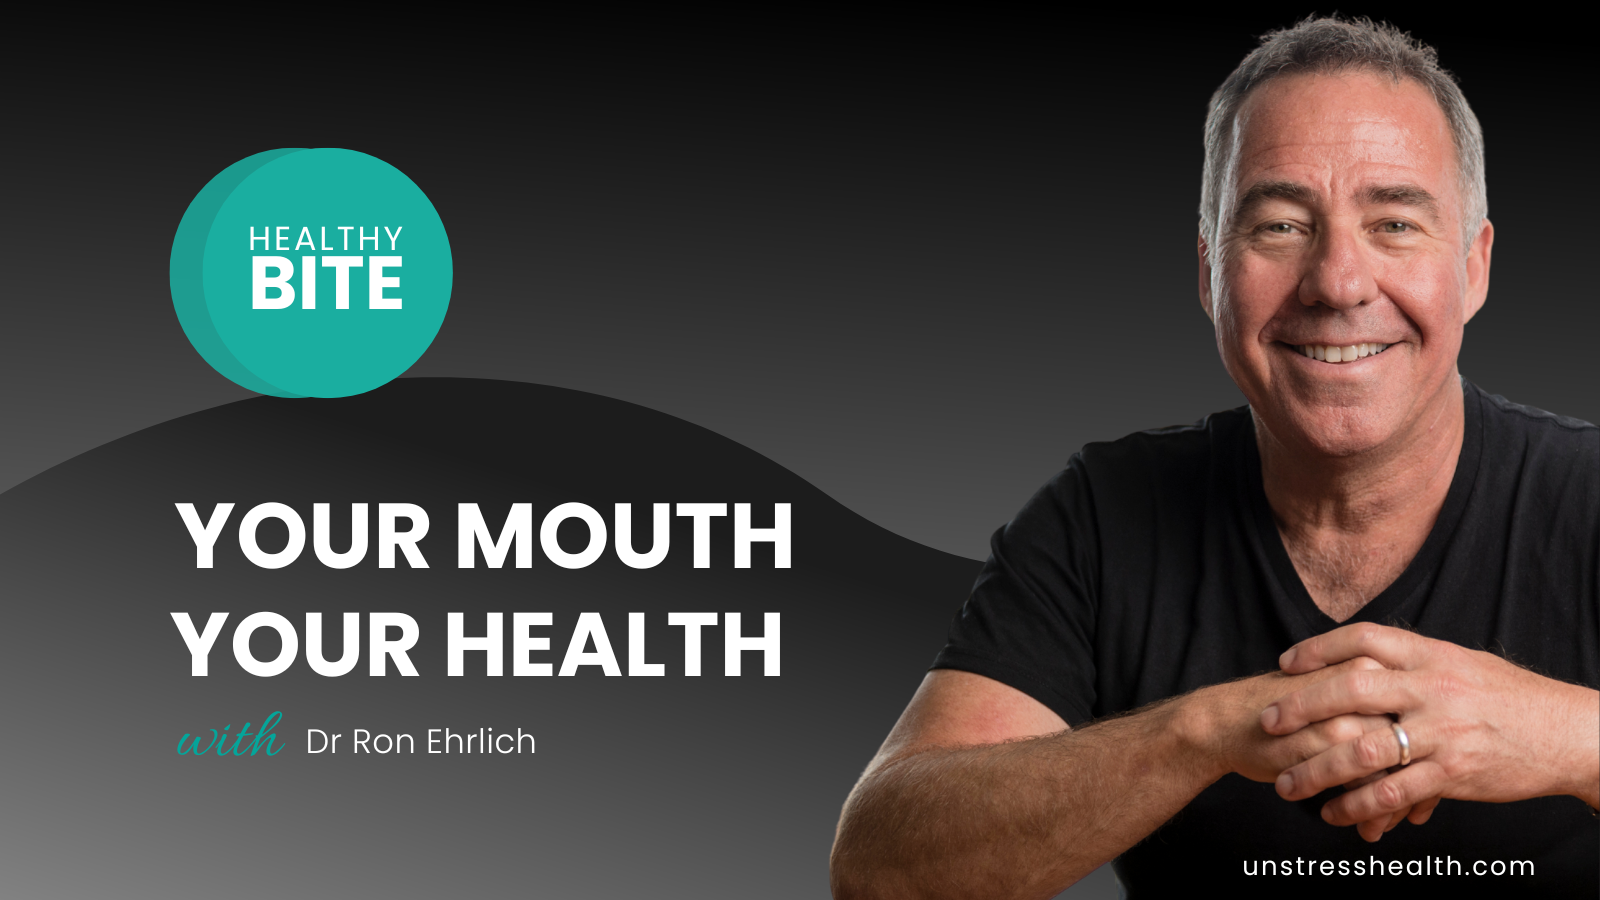 HEALTHY BITE | Prof John Mew & Dr Mike Mew: Why Your Mouth, Orthotropics and Doing Mewings are the Key to Breathing Well and Sleeping Well